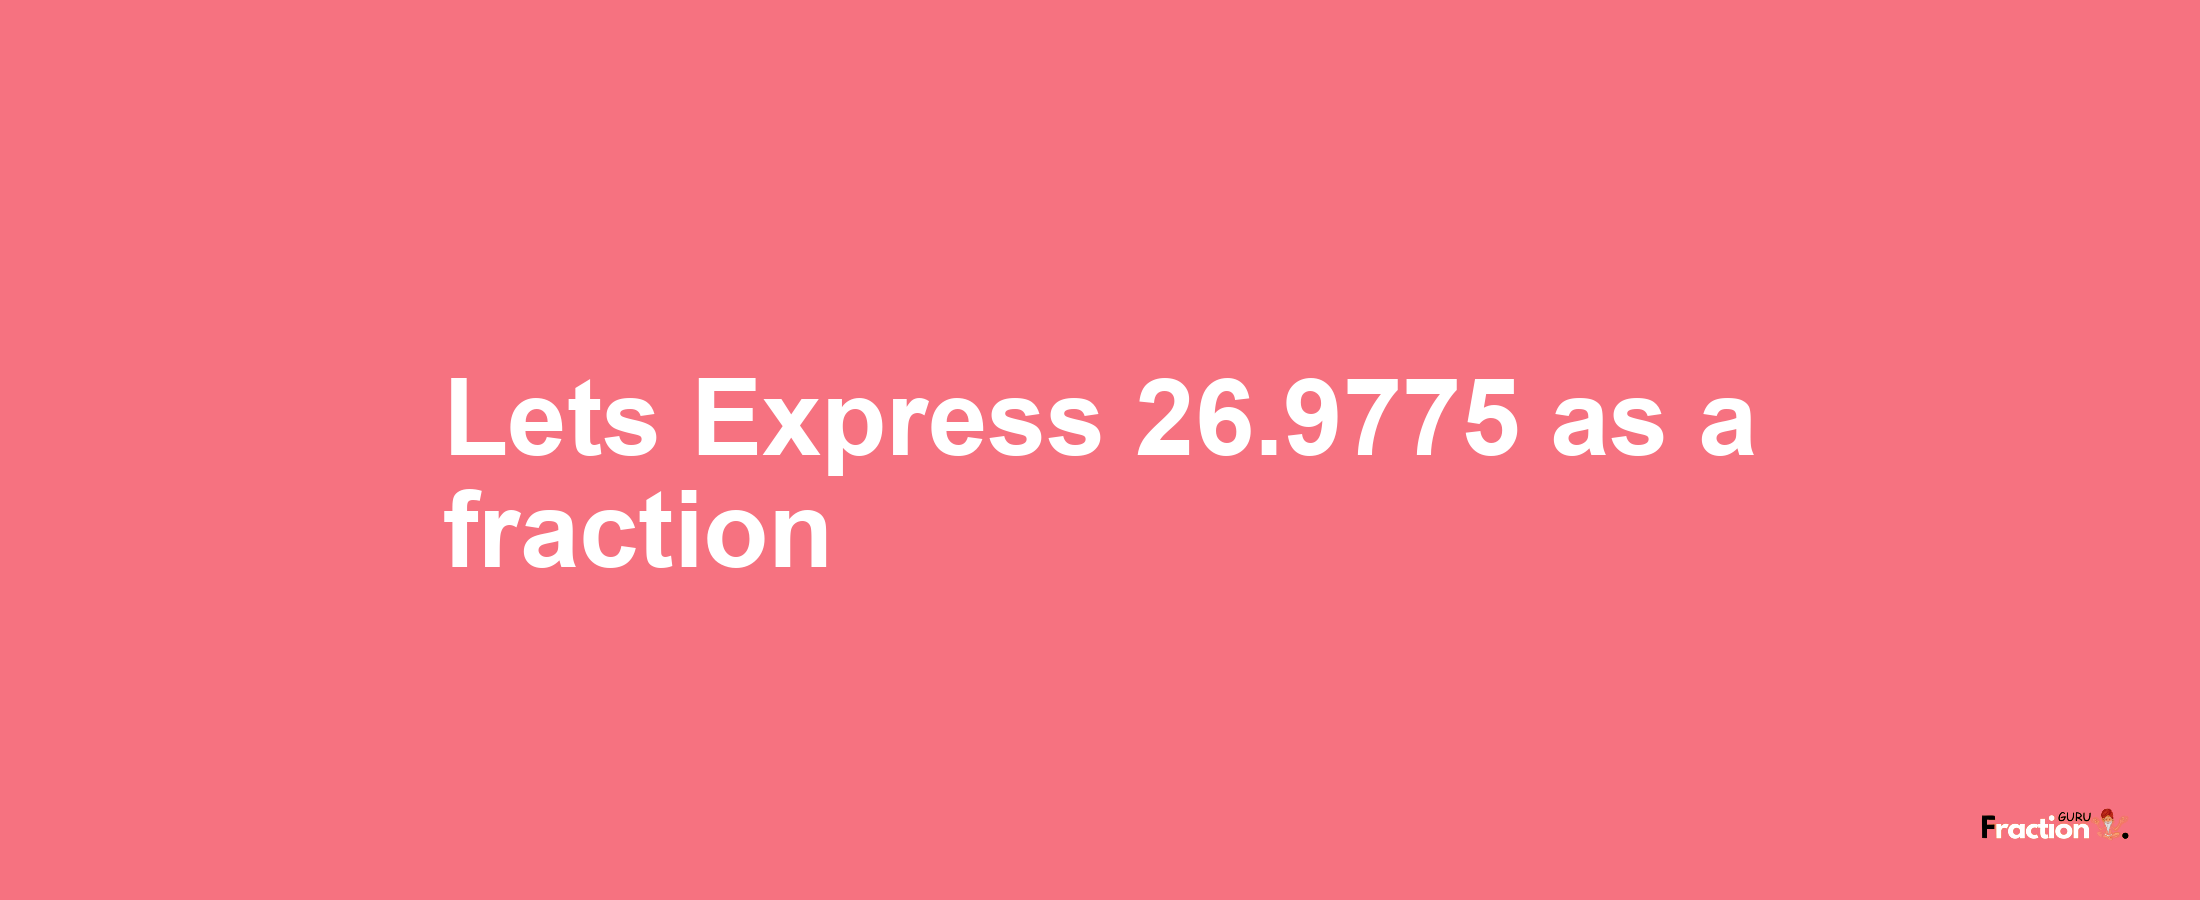 Lets Express 26.9775 as afraction